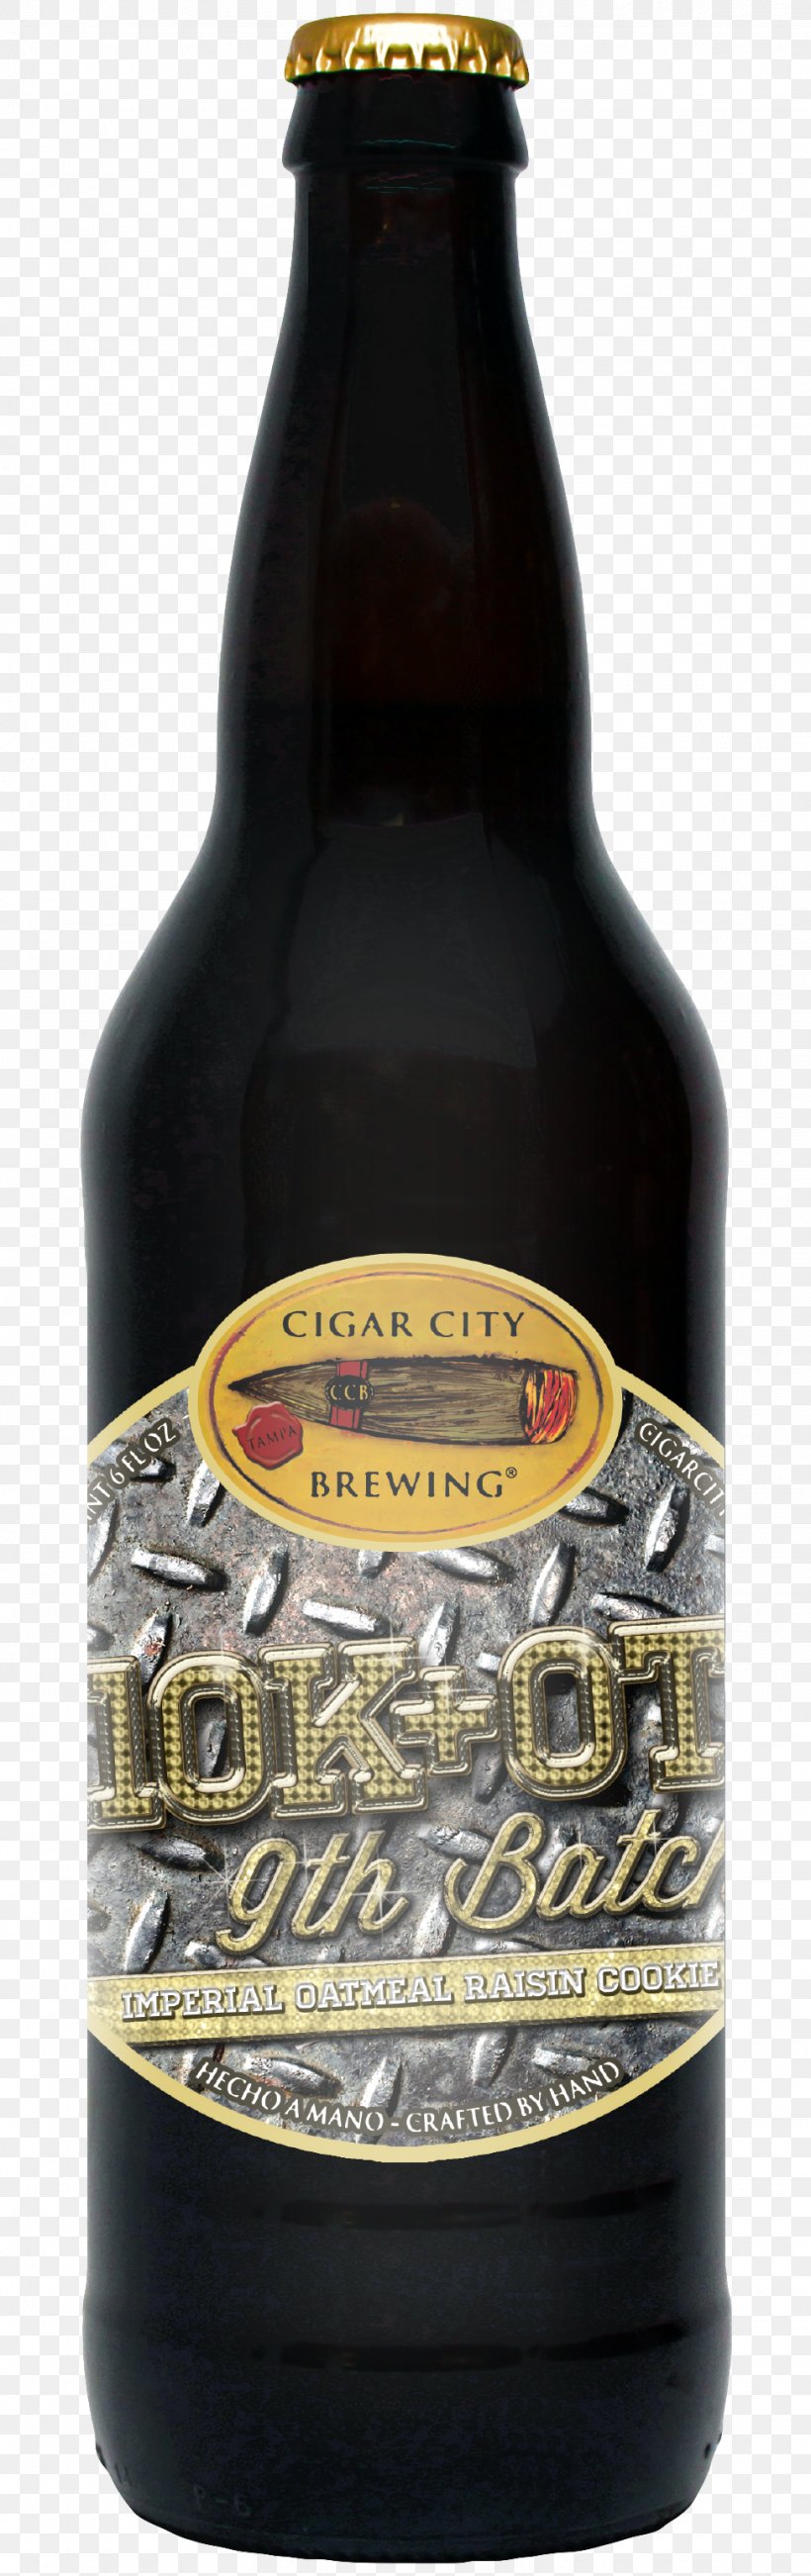 Ale Cigar City Brewing Company Beer Bottle Stout, PNG, 975x3096px, Ale, Alcoholic Beverage, Beer, Beer Bottle, Beer Brewing Grains Malts Download Free